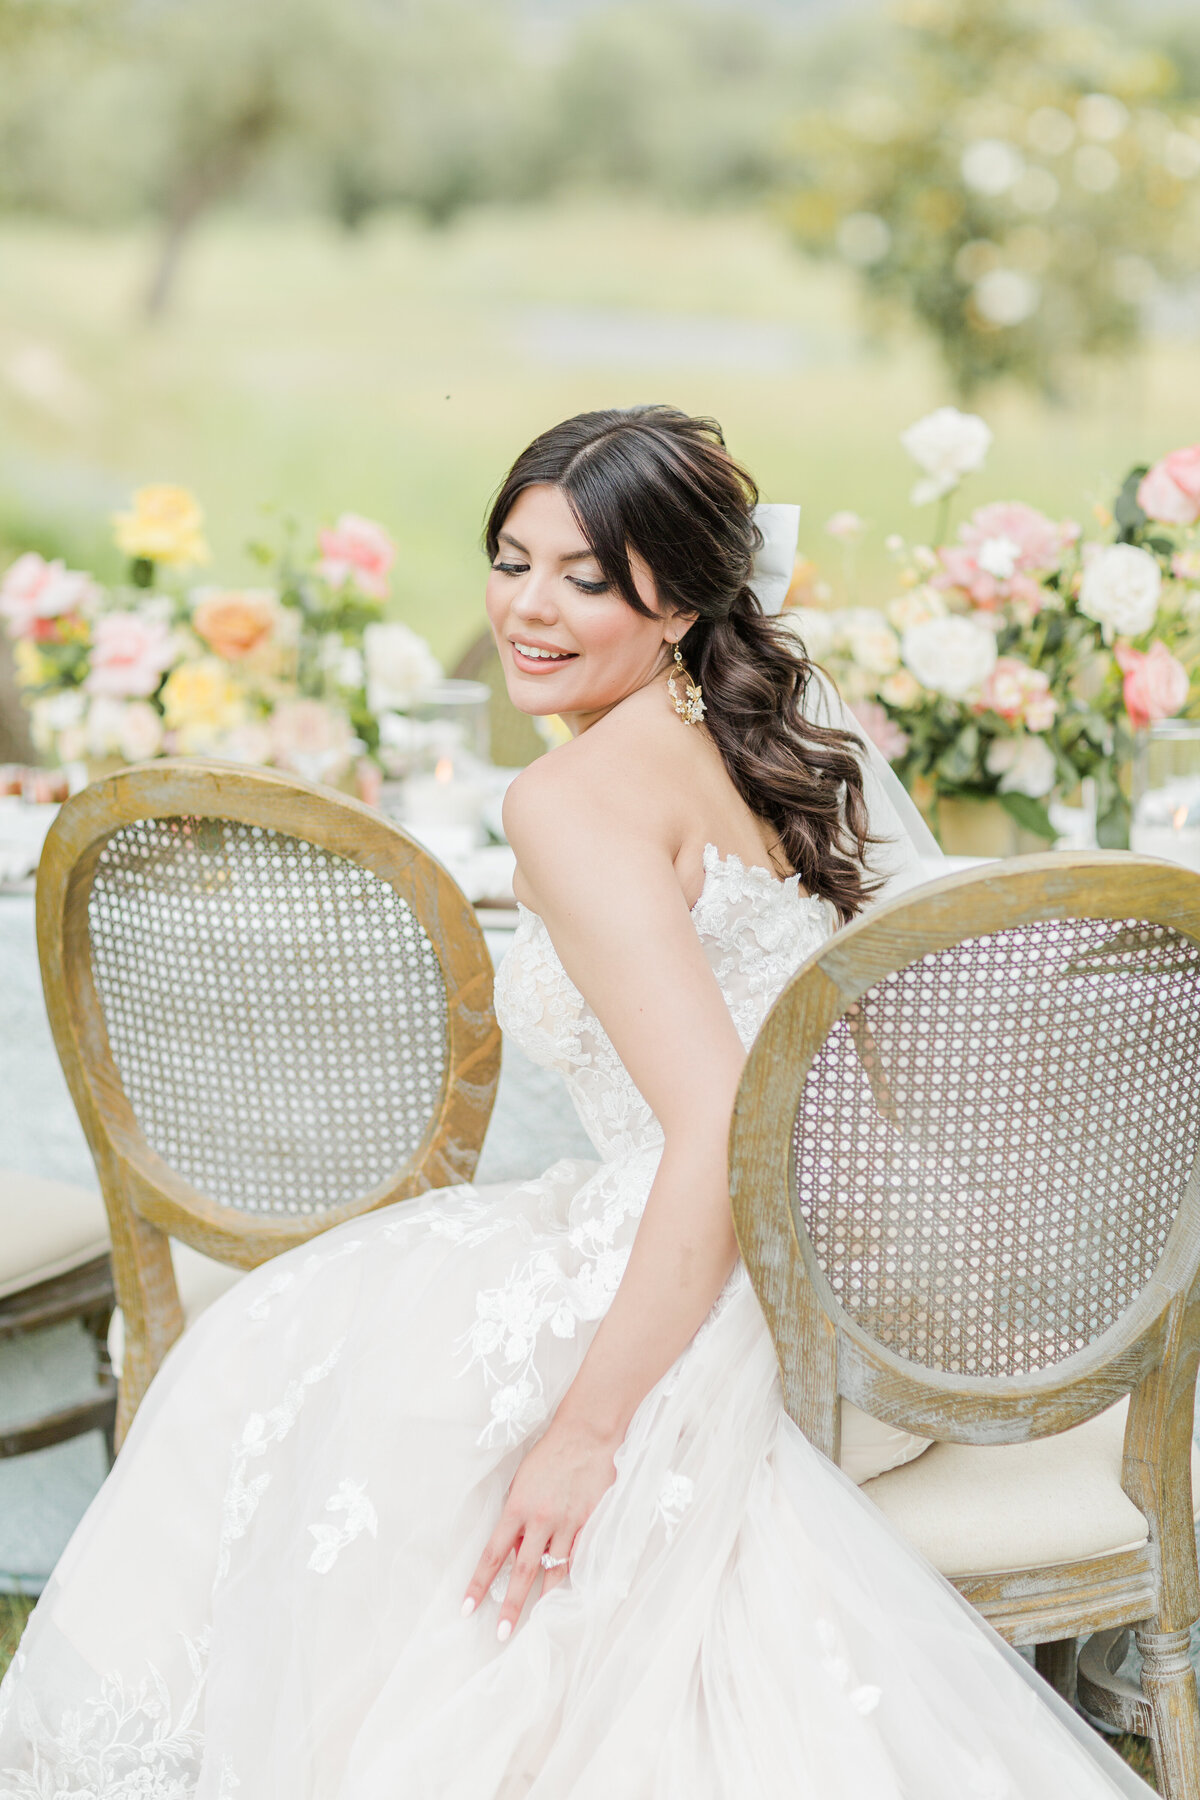 Bride is sitting on a chair for a casual portrait before her Boston wedding reception. the bride is sitting on the edge of the chair and looking over her shoulder smiling with her eyes closed for a joyful portrait. The table behind her is filled with pink, white, and yellow blooms. Captured by MA wedding photographer Lia Rose Weddings